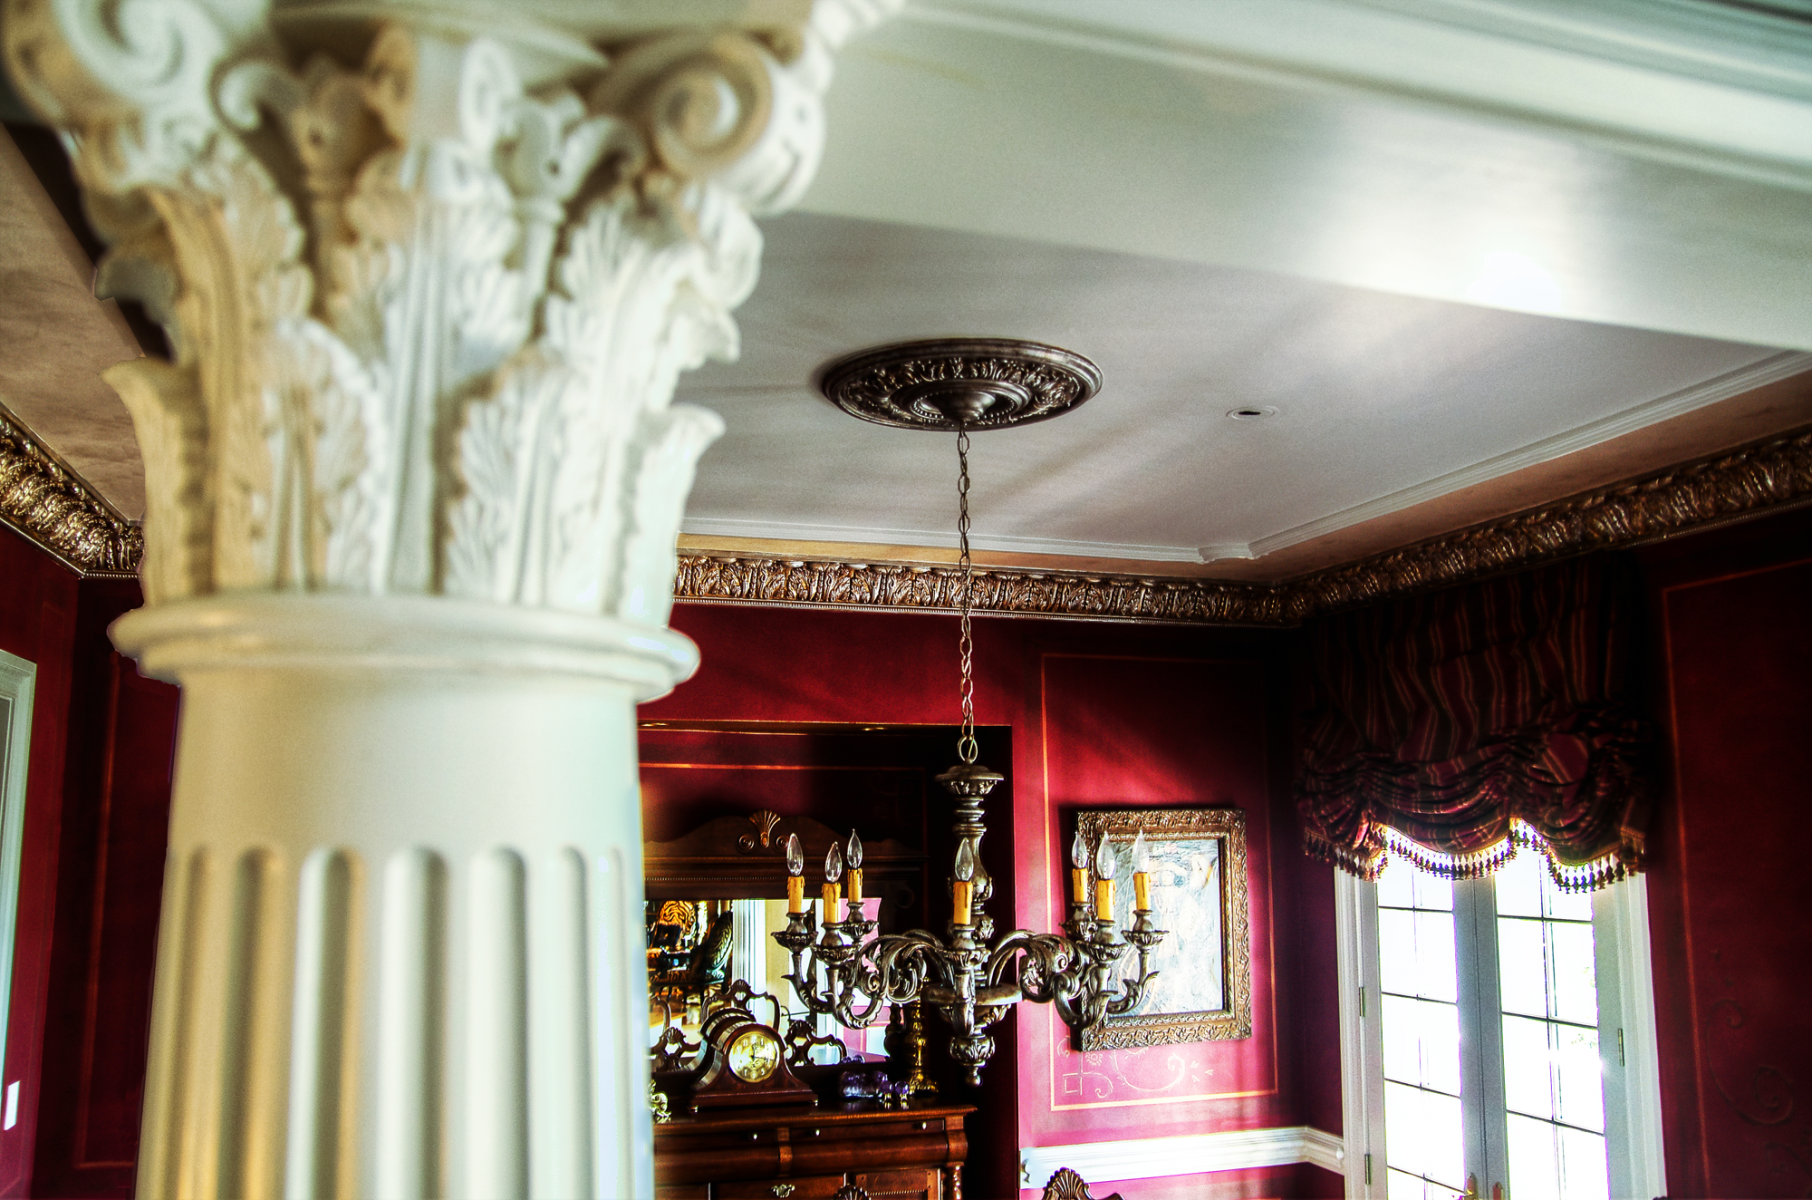 For this ceiling design a beautiful Lusterstone with gilt and antique silver and accents.